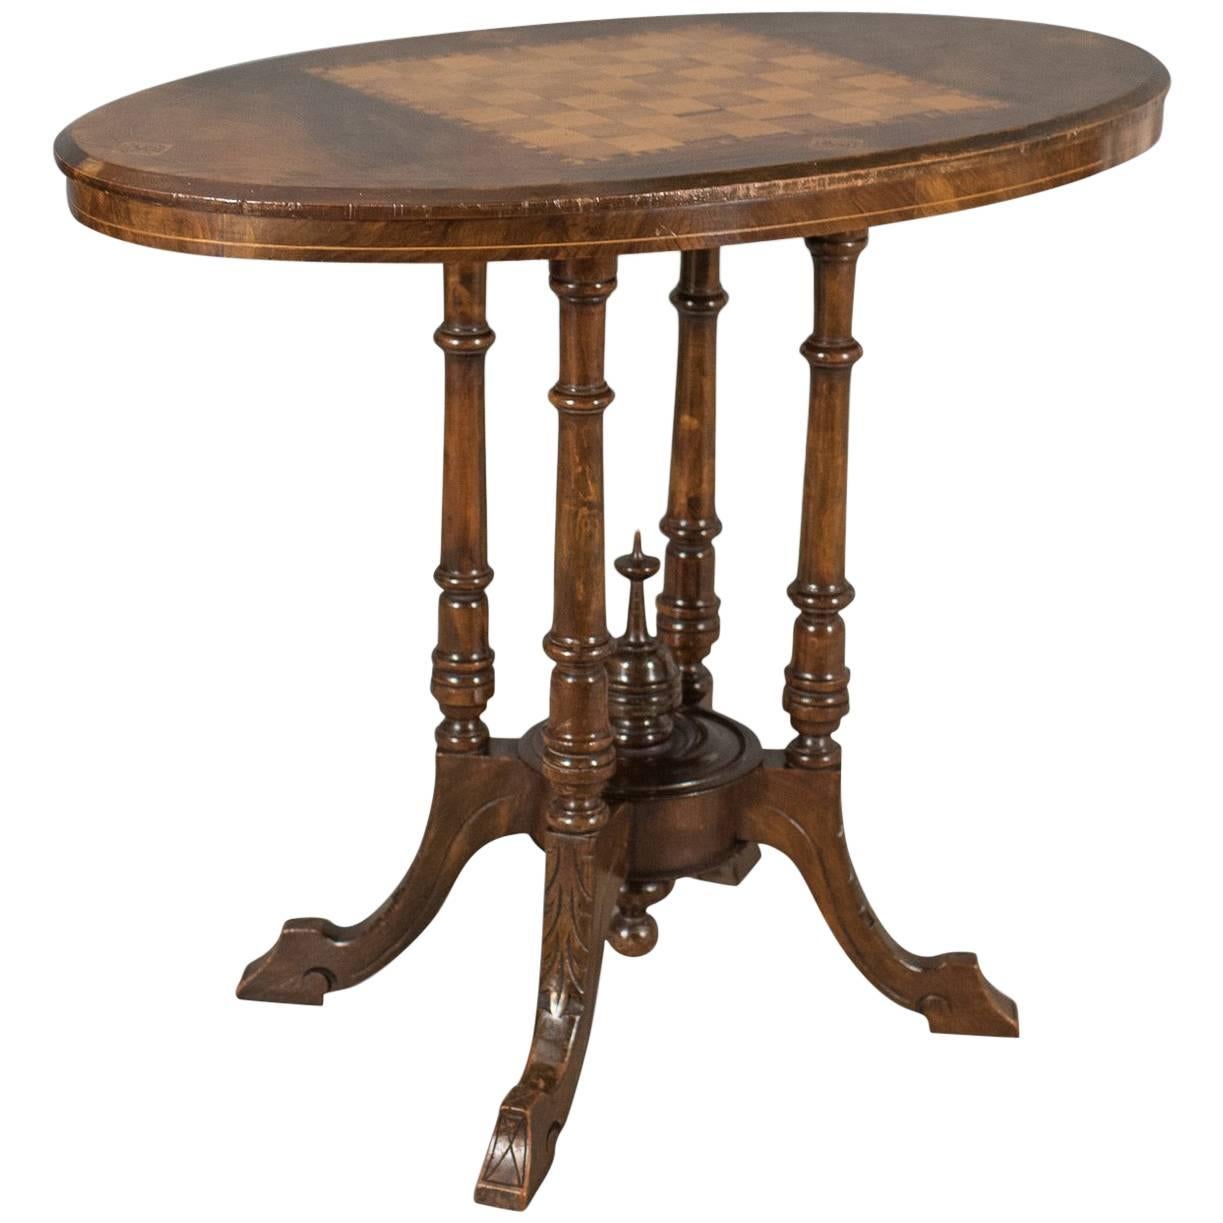 Victorian Antique Side Table with Inlaid Chessboard, English, circa 1880